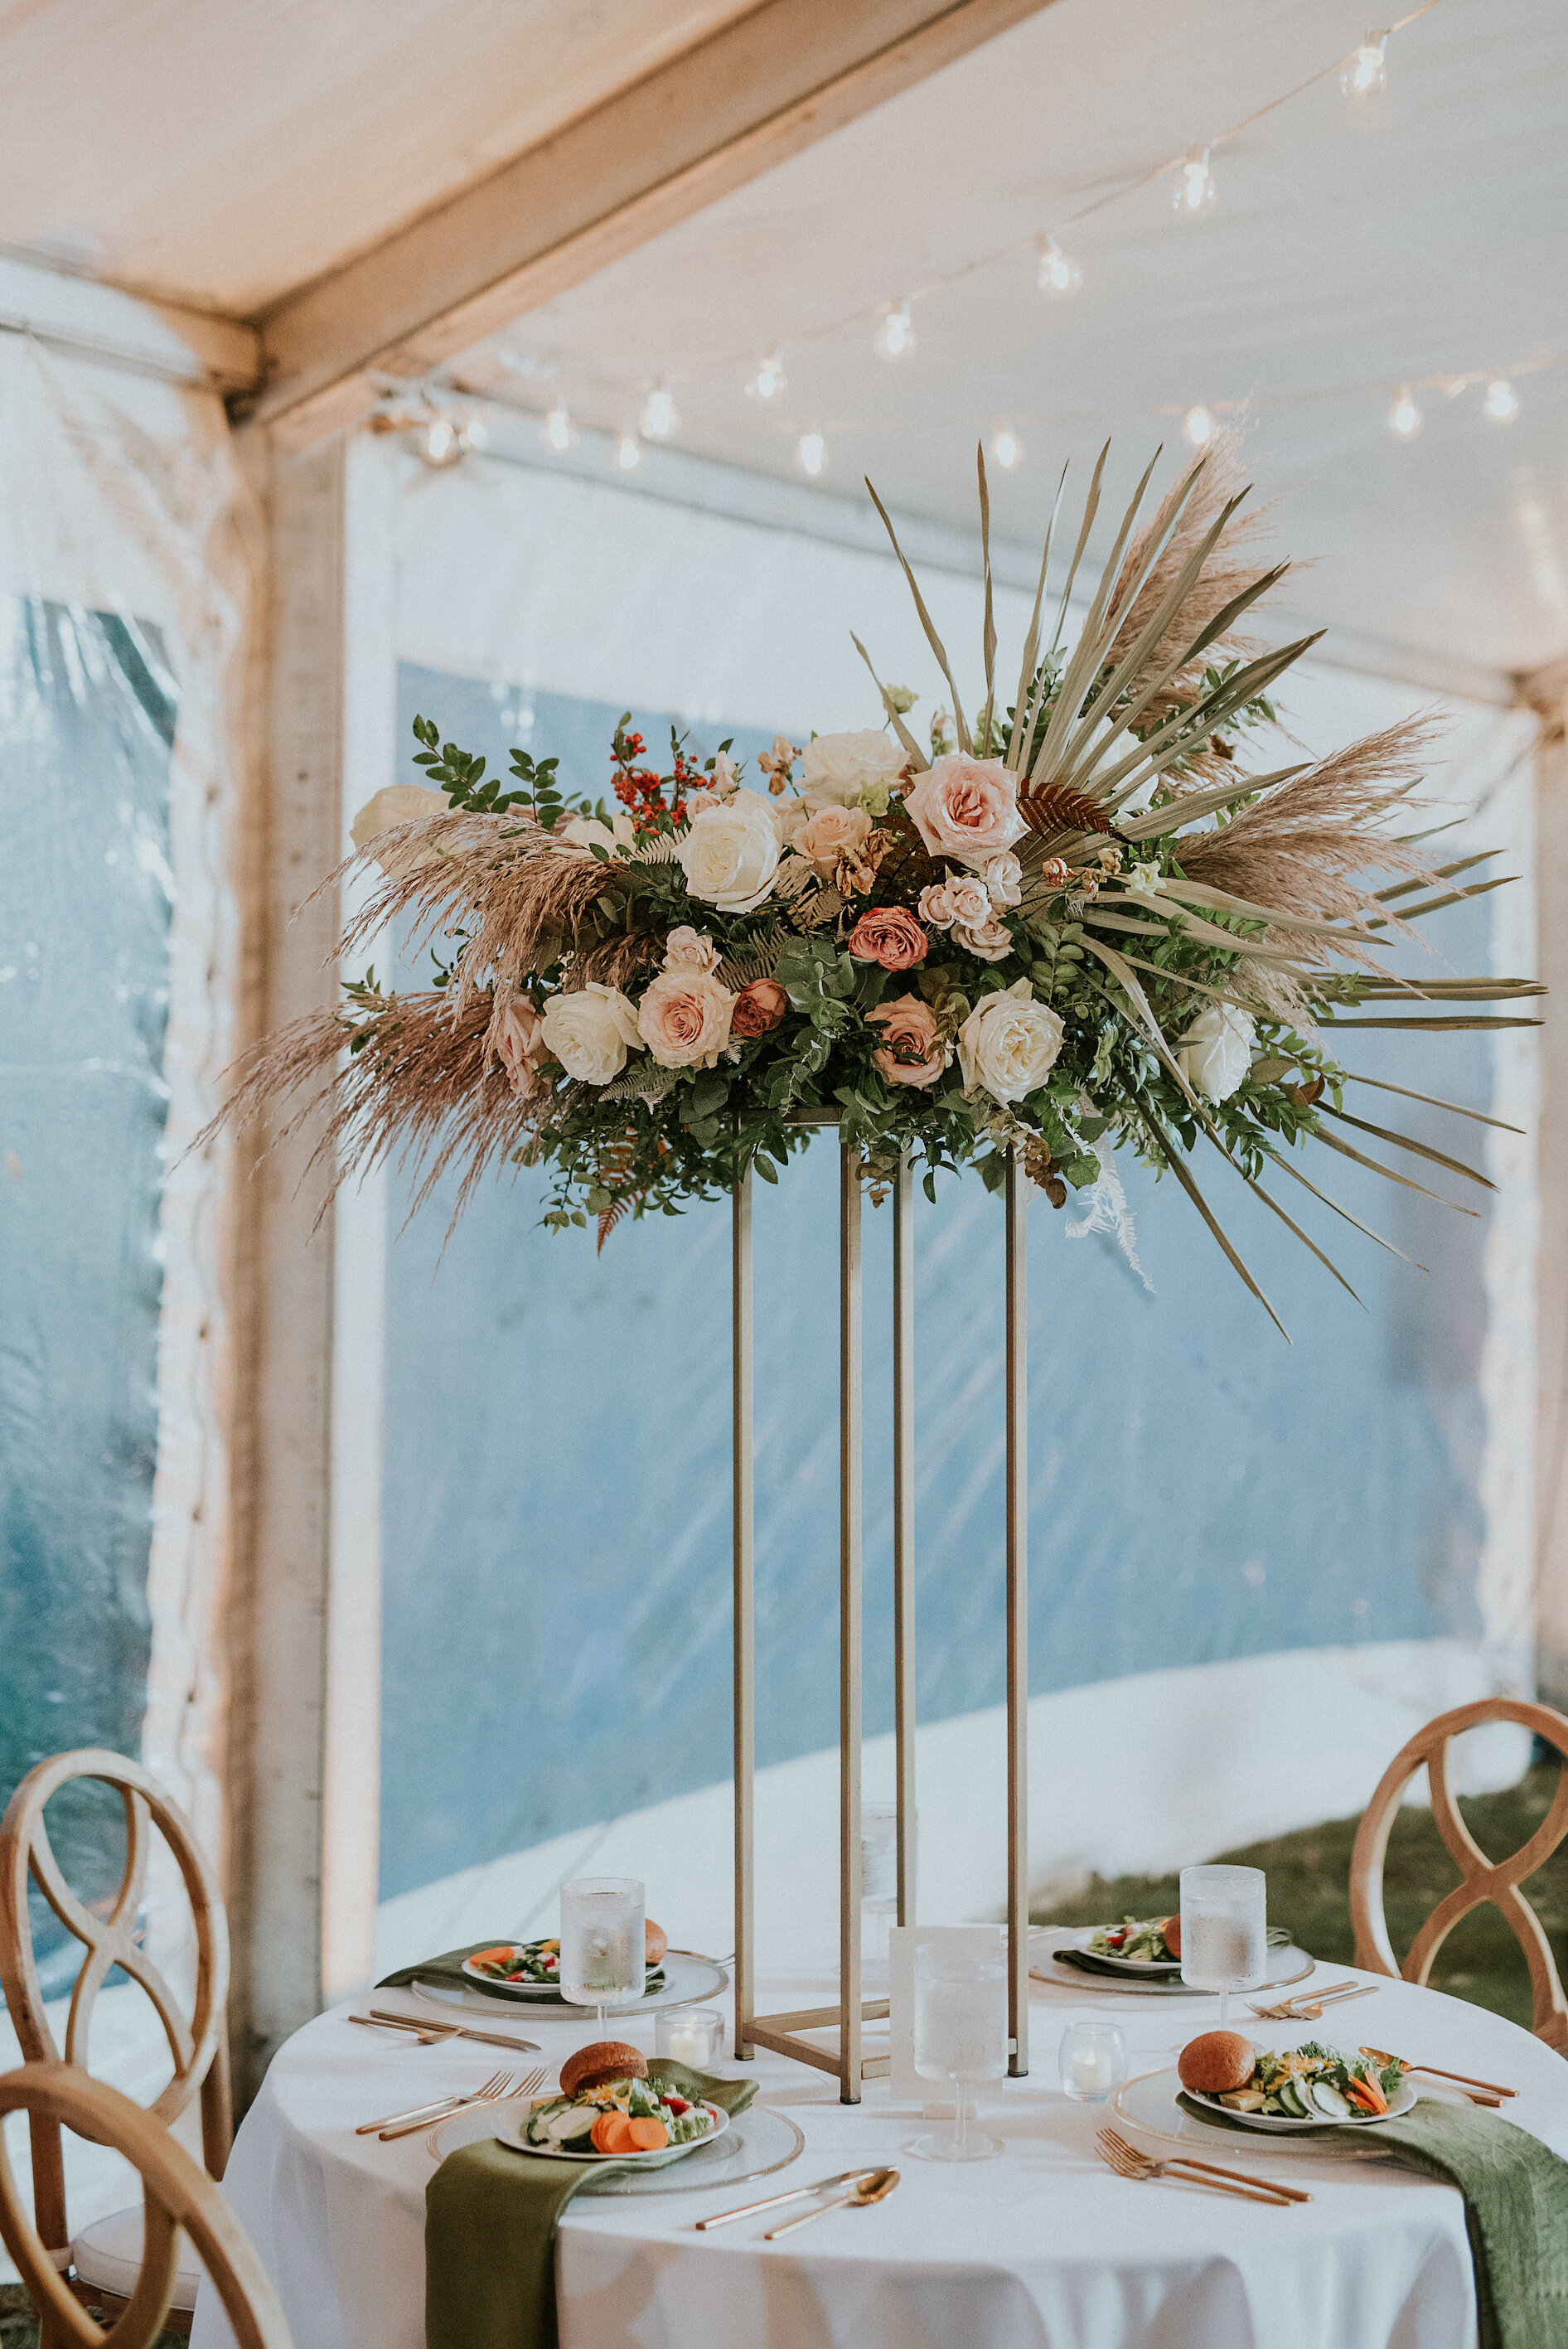 Bohemian and modern yet classically elegant. This wedding perfectly married boho elements of pampas grass, eucalyptus, and dried florals with topical stems of anthurium and orchid. Quicksand roses, cappuccino roses, ilex berry, and rust fern add a p…